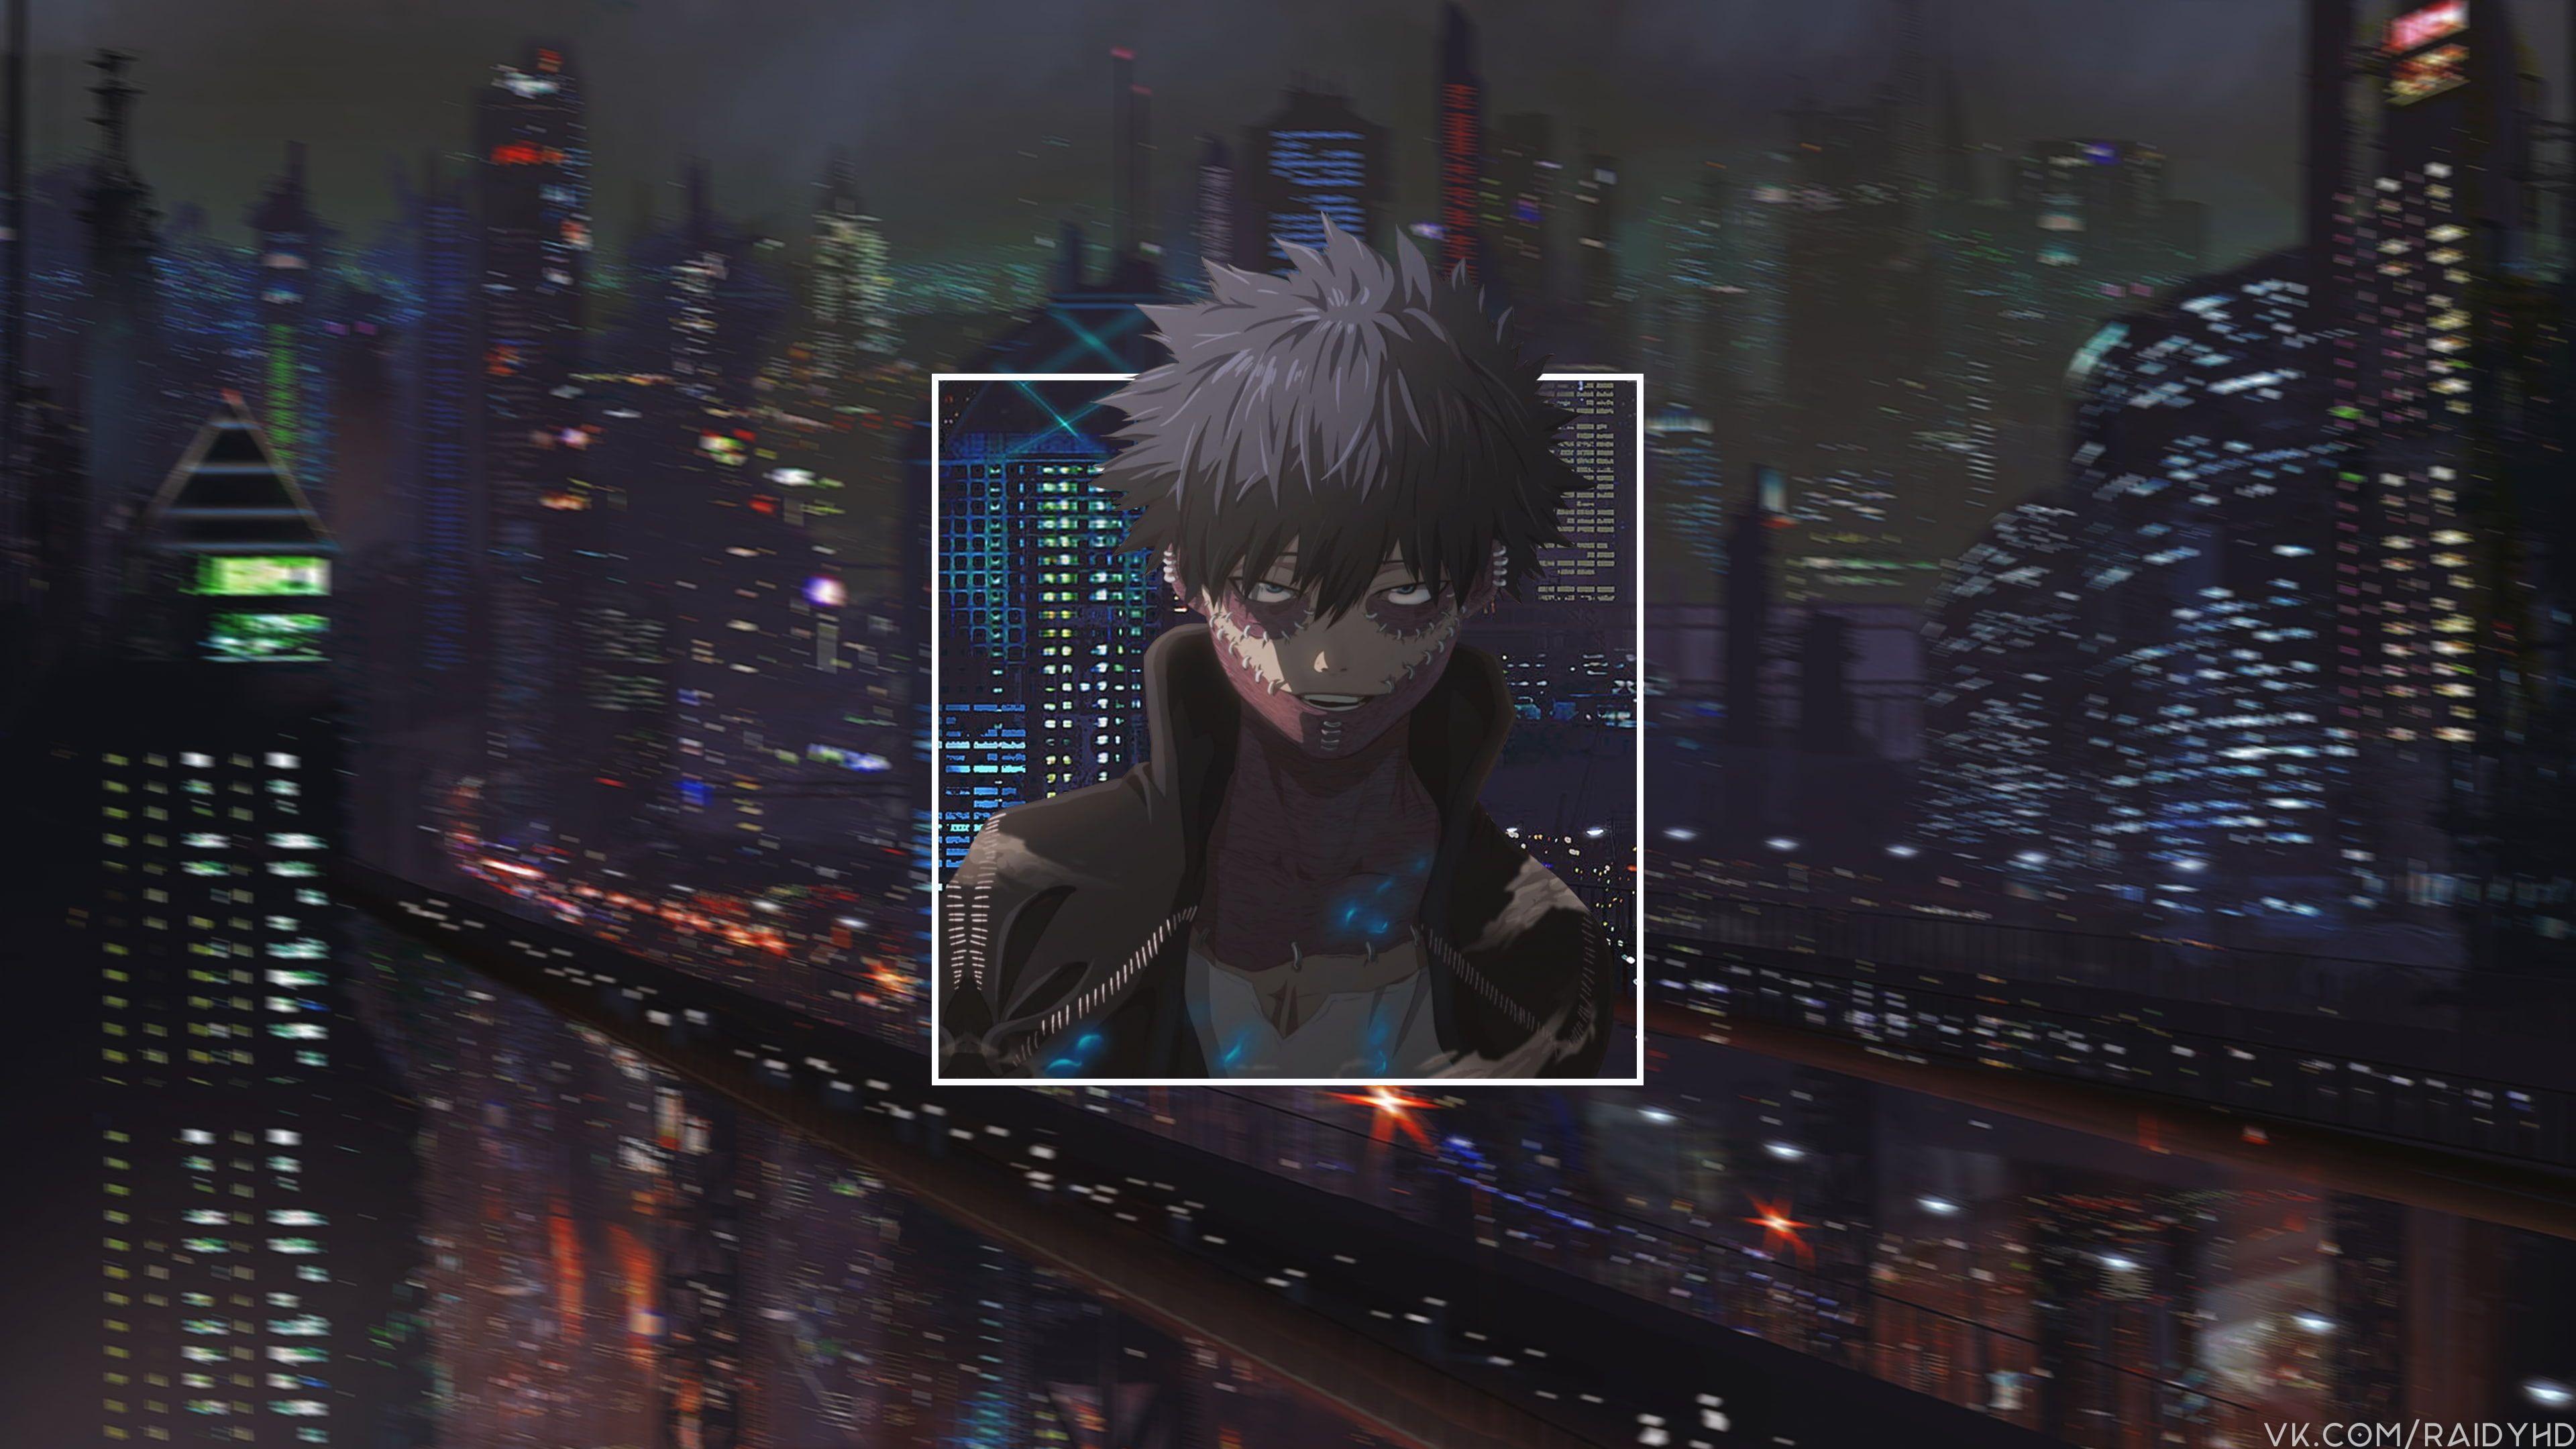 Anime Anime Boys #Dabi #picture In Picture K #wallpaper #hdwallpaper #desktop. Cute Desktop Wallpaper, Anime Computer Wallpaper, Bape Wallpaper